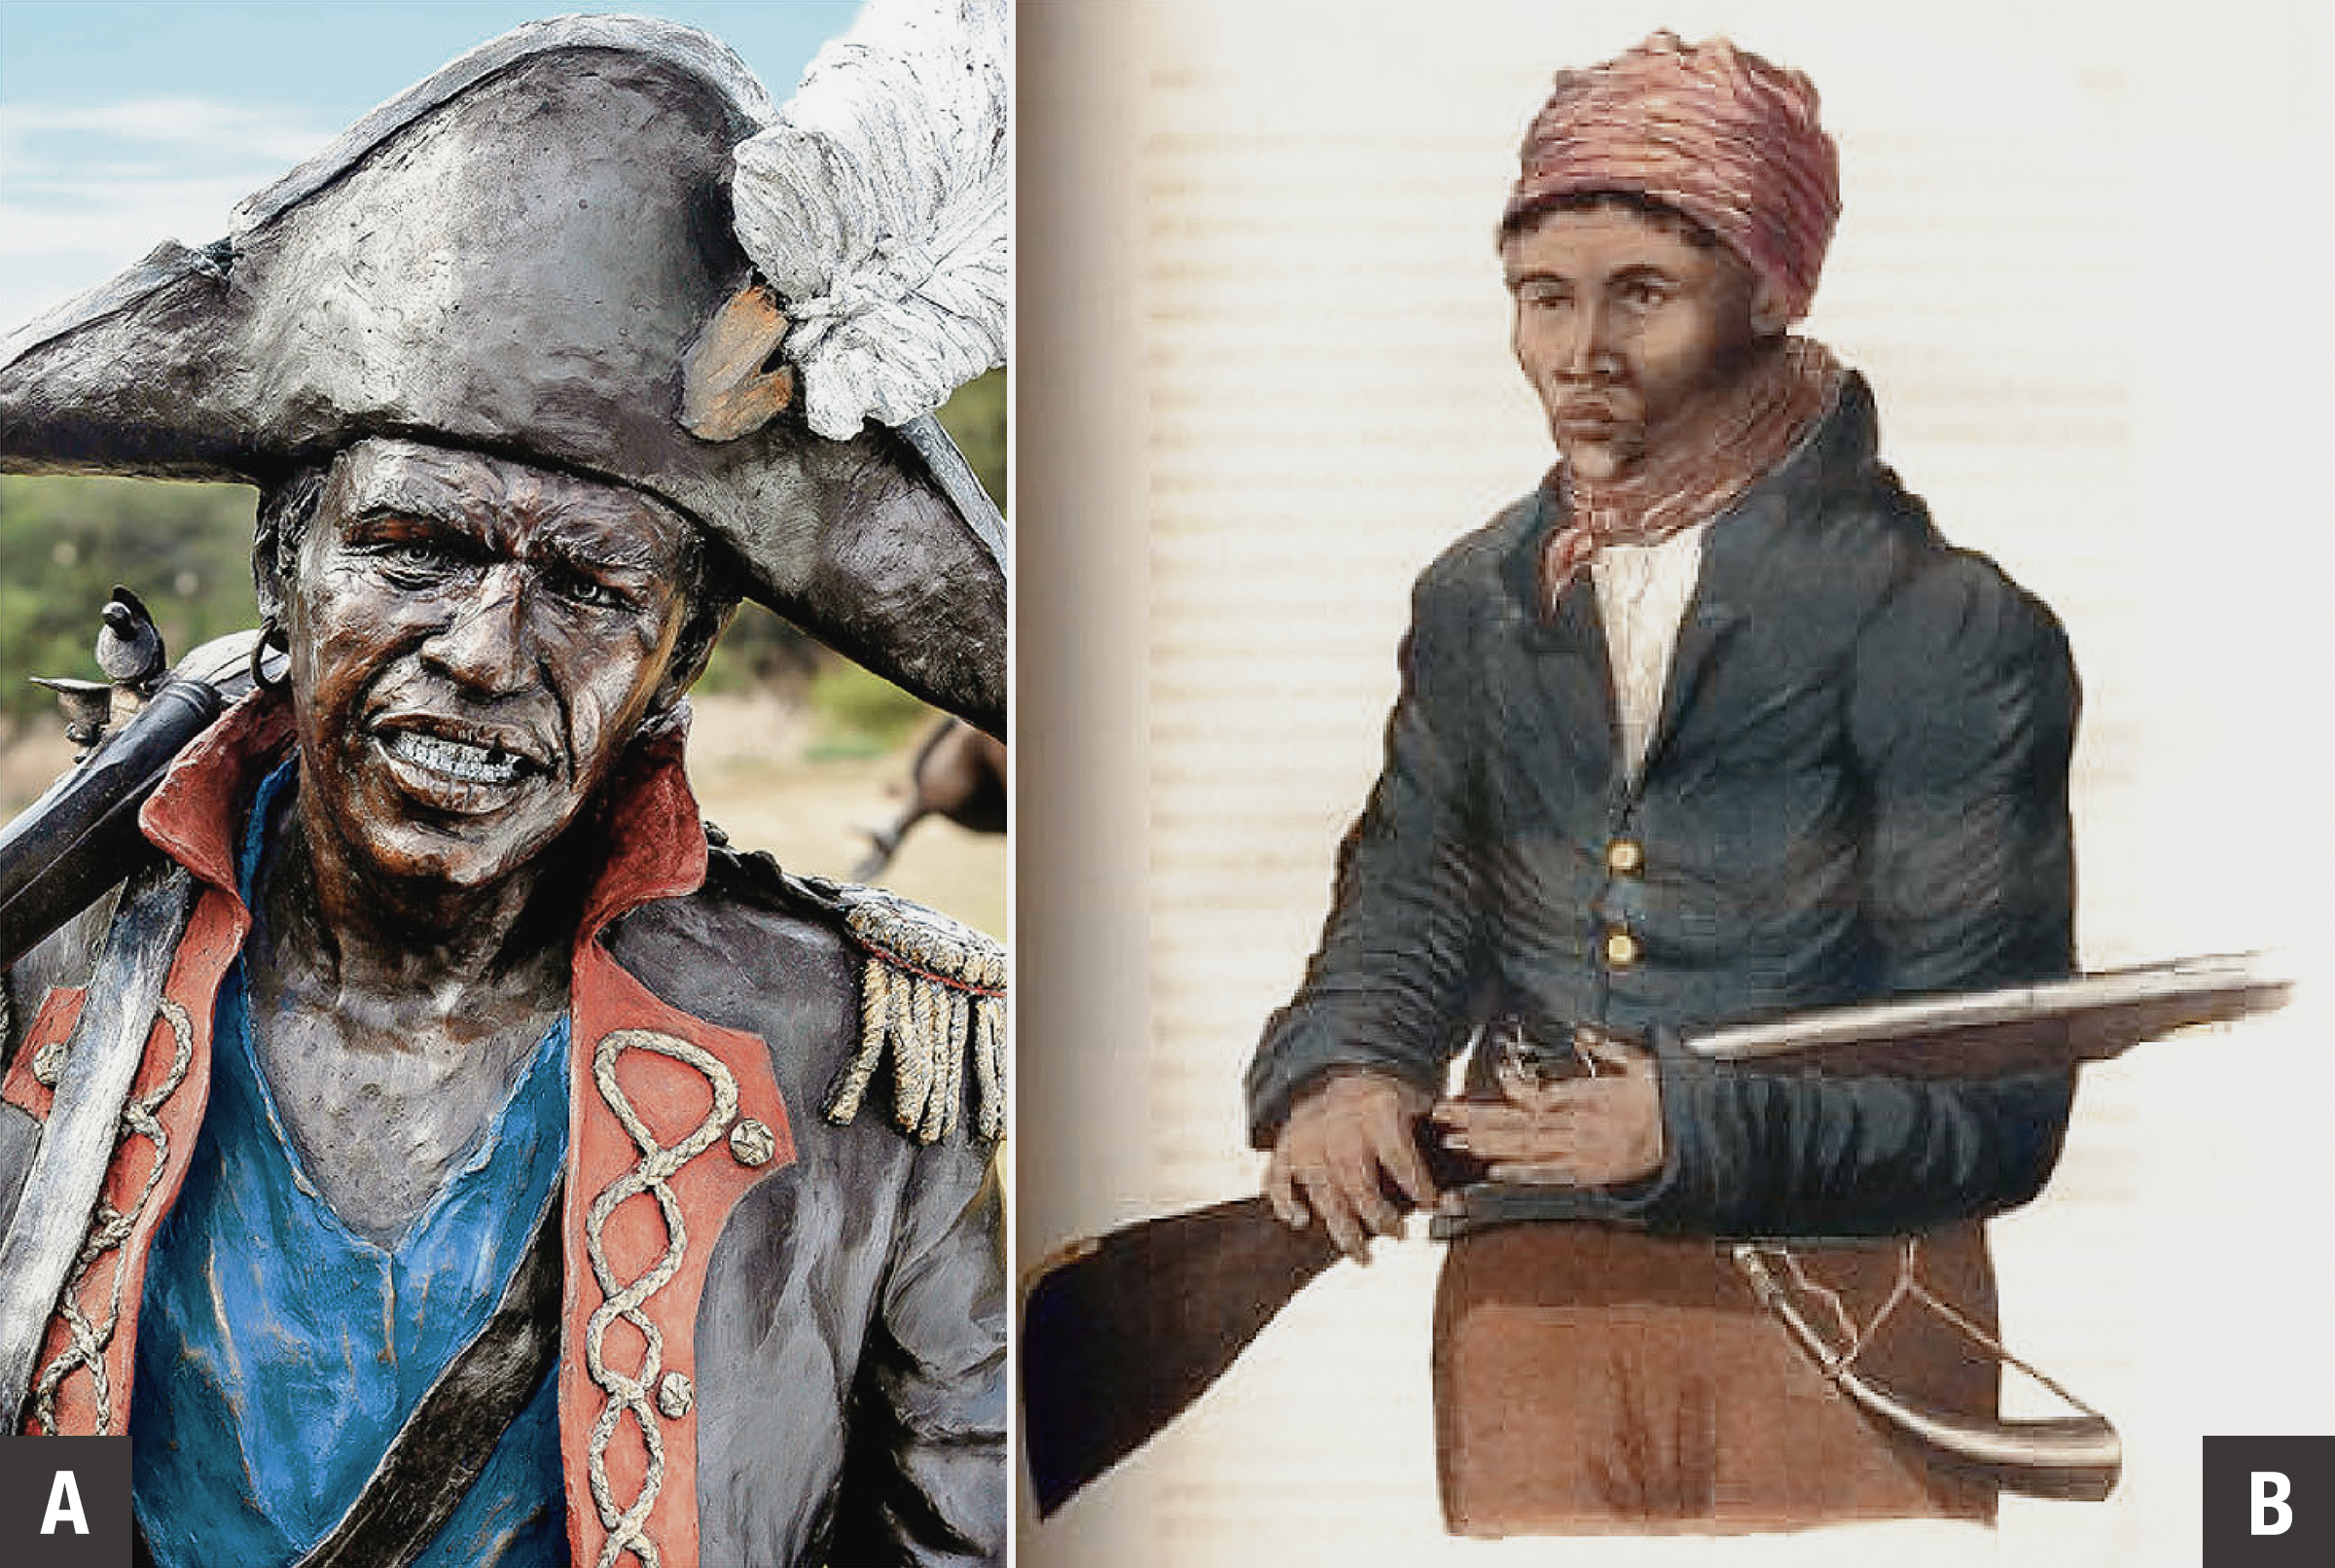 Two representations of oppressed individuals in the Cape Colony: (a) Louis van Mauritius, who led a rebellion of 300 slaves in the Cape in 1808, is shown here in the National Heritage Monument sculpture The Long March to Freedom. Reproduced with permission of the artist Barry Jackson and the National Heritage Project Company; (b) ‘Portrait of Júli, a Faithful Hottentot’ by William Burchell (1822: 160)